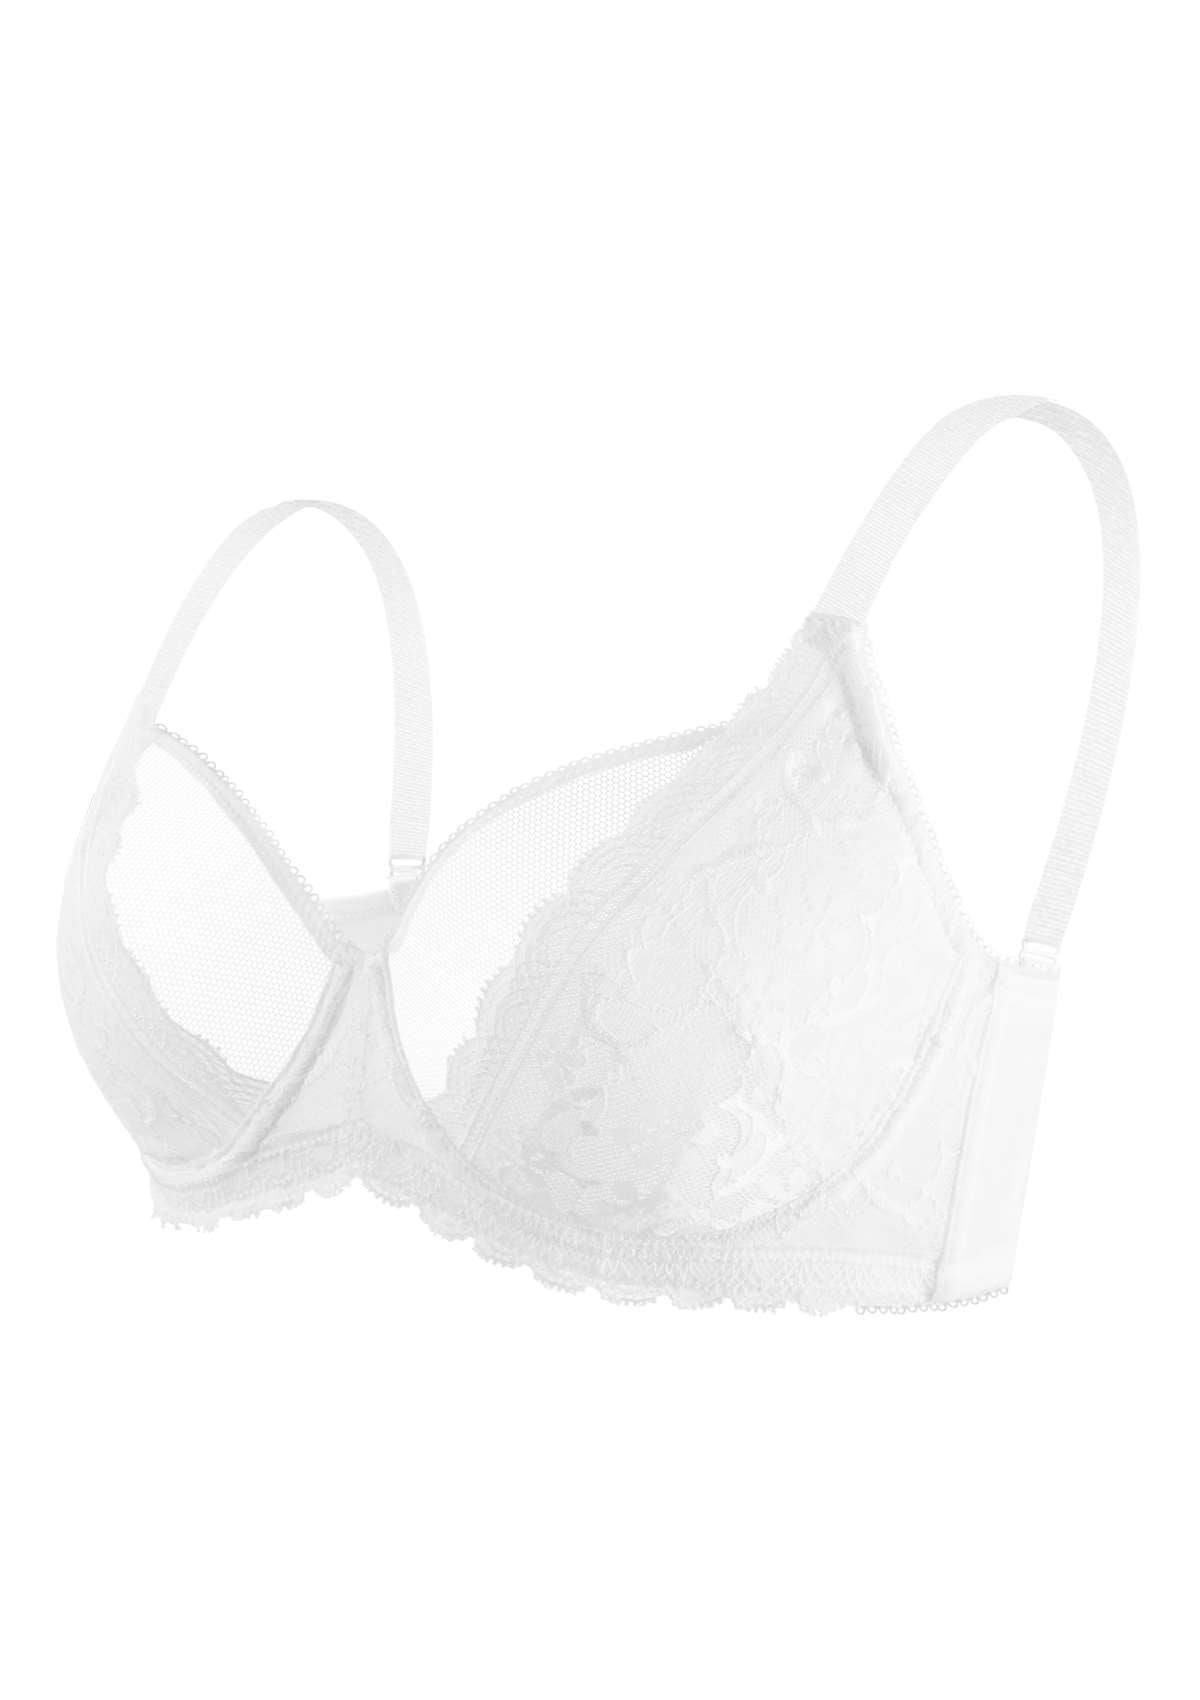 HSIA Anemone Big Bra: Best Bra For Lift And Support, Floral Bra - Burgundy / 42 / D